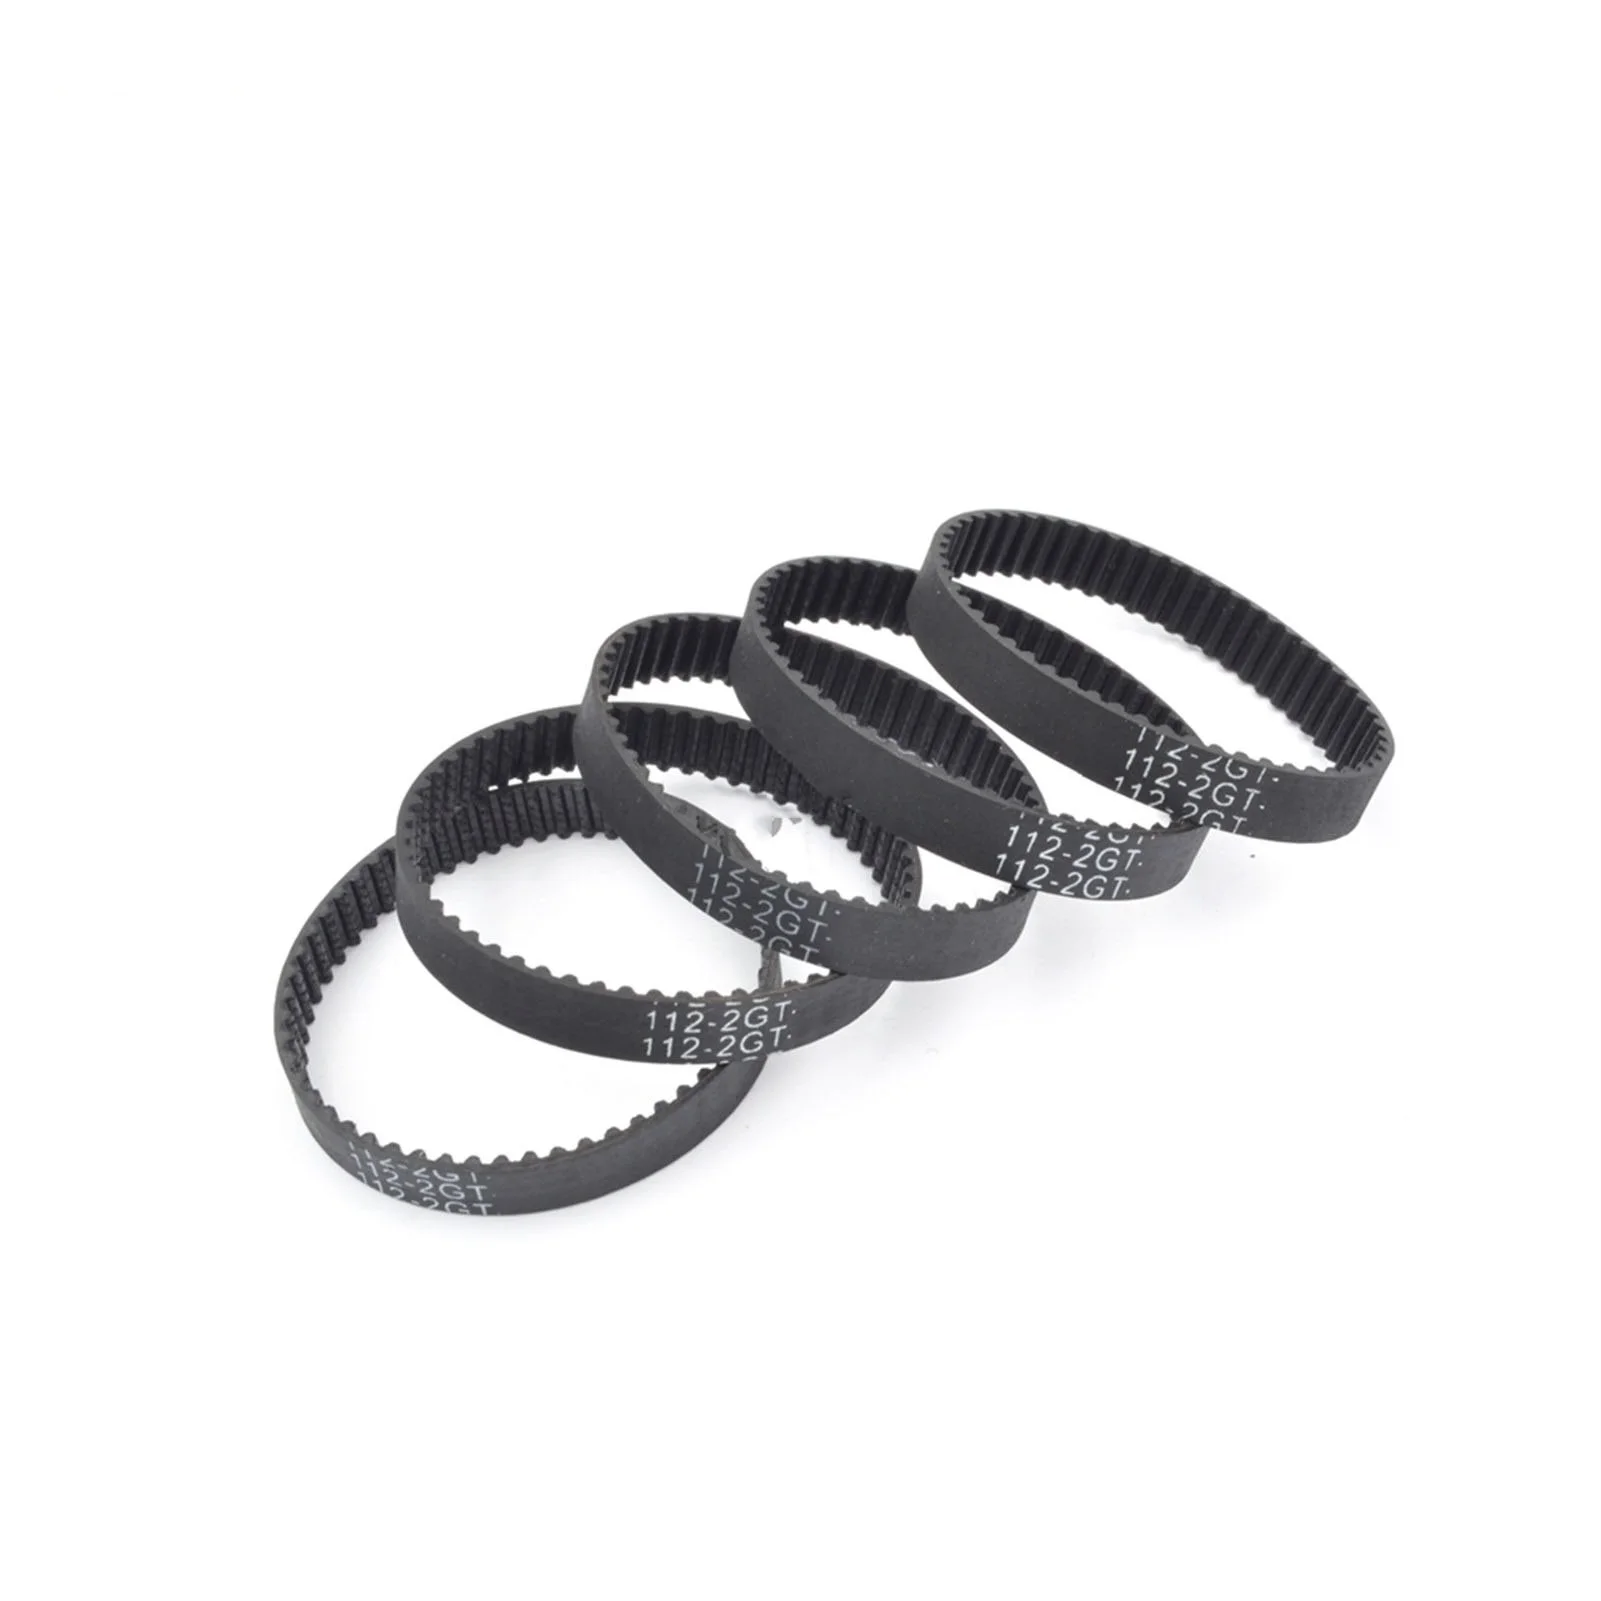 

5pcs GT3 2MGT 2M 2GT Synchronous Timing Belt, Pitch Length 116/118/120/122/124, Width 6mm/9mm, Teeth 58/59/60/61 62 in